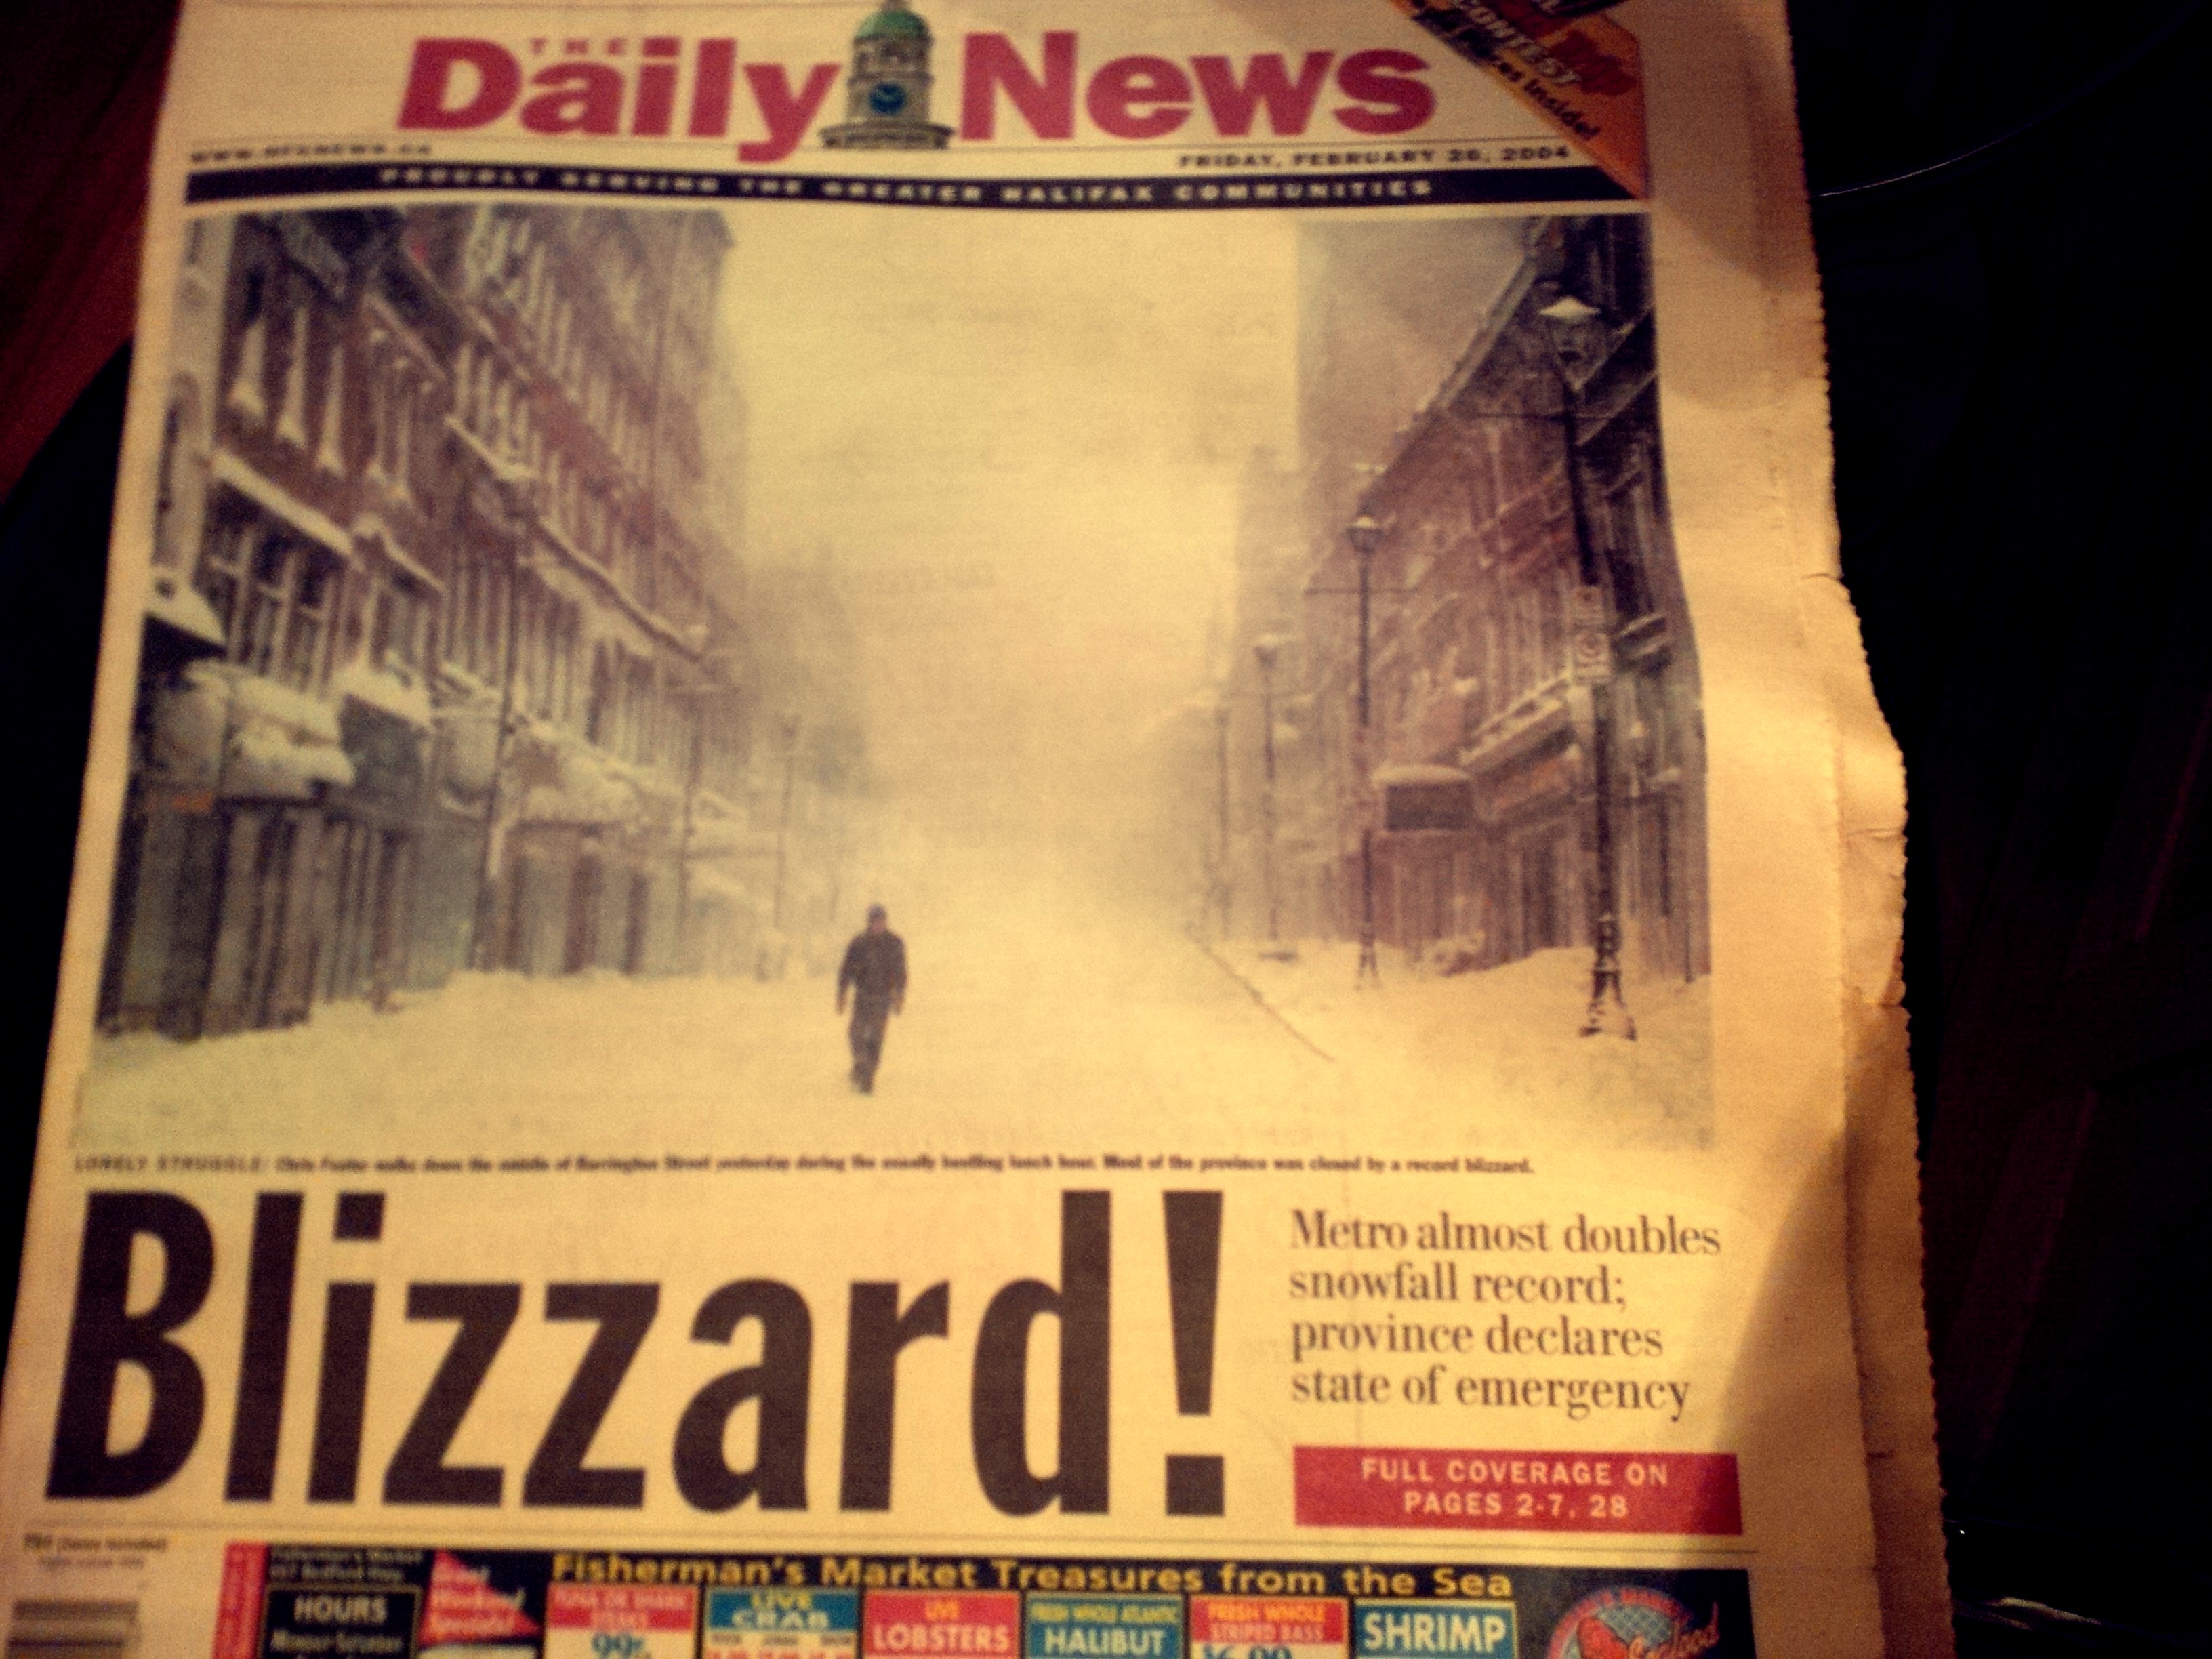 The cover of The Daily News February 20, 2004